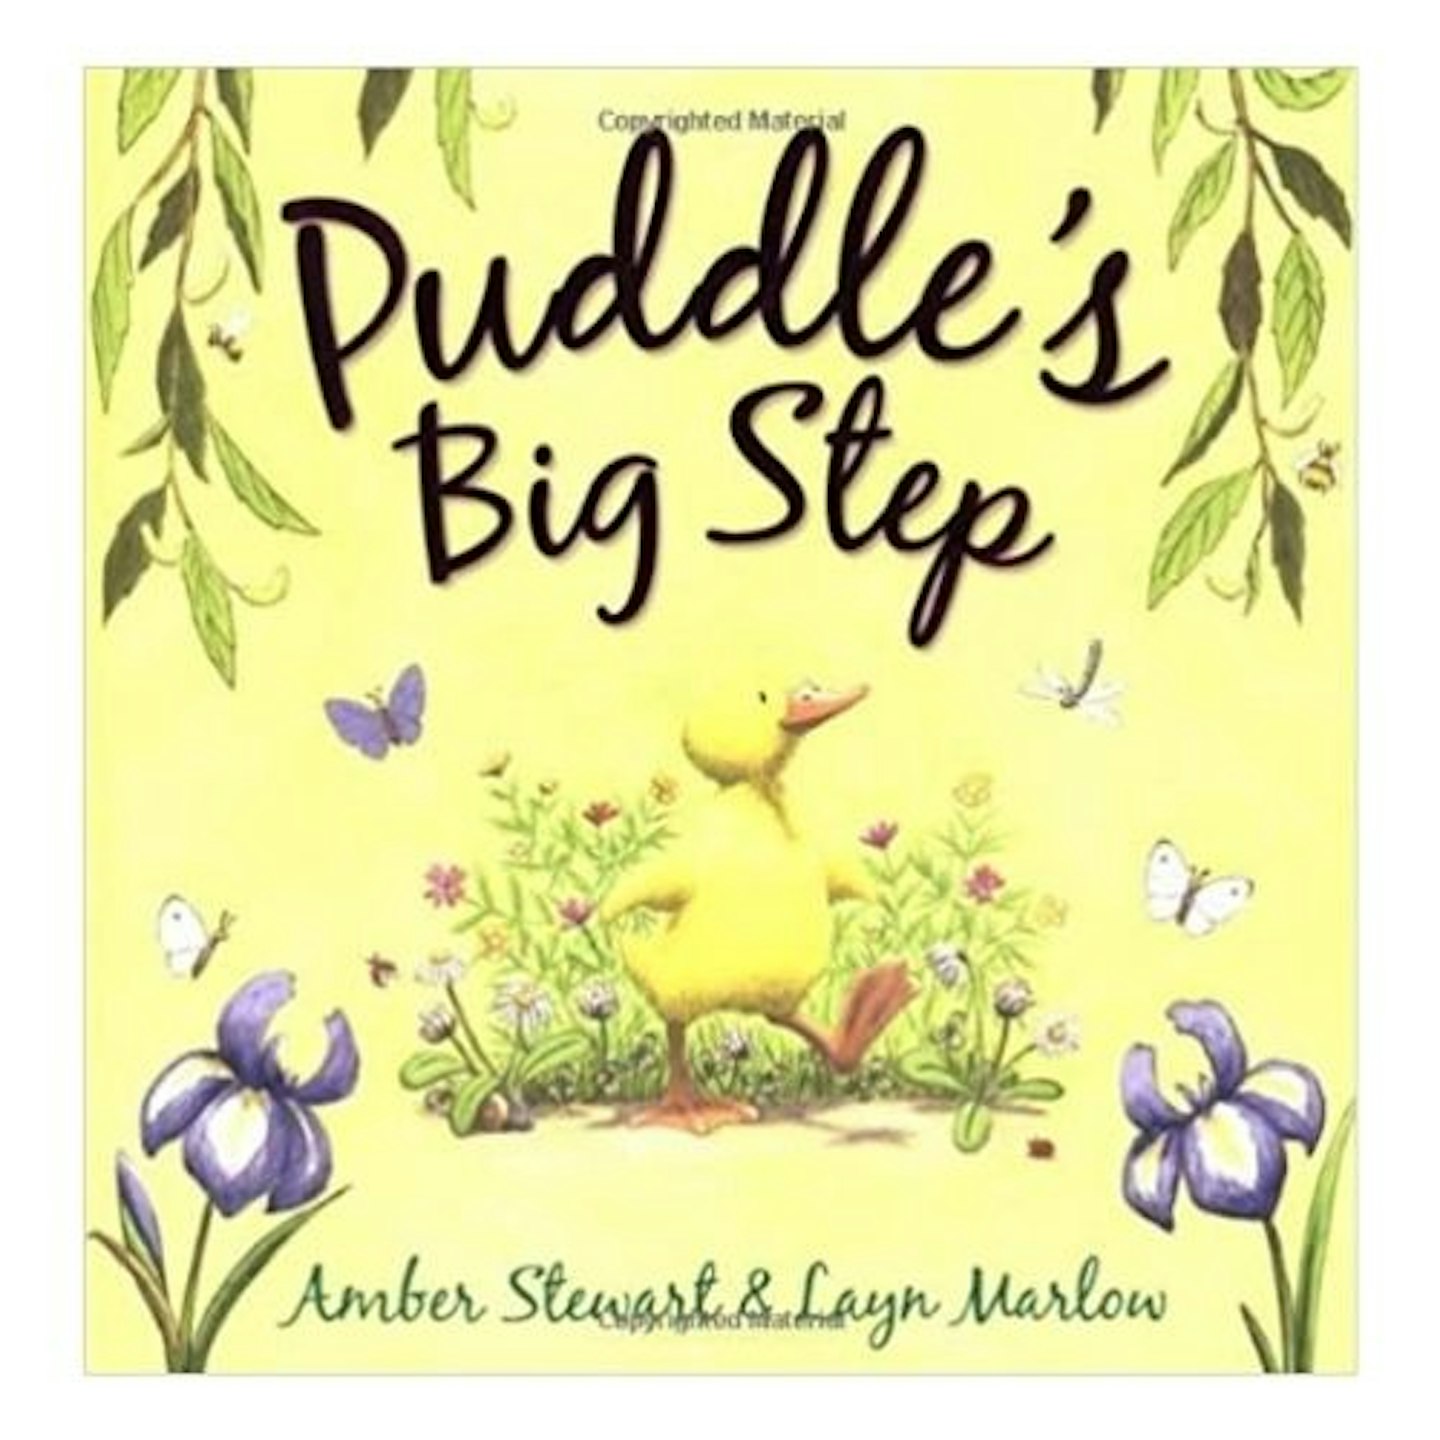 best books to prepare for nursery or school puddles big step